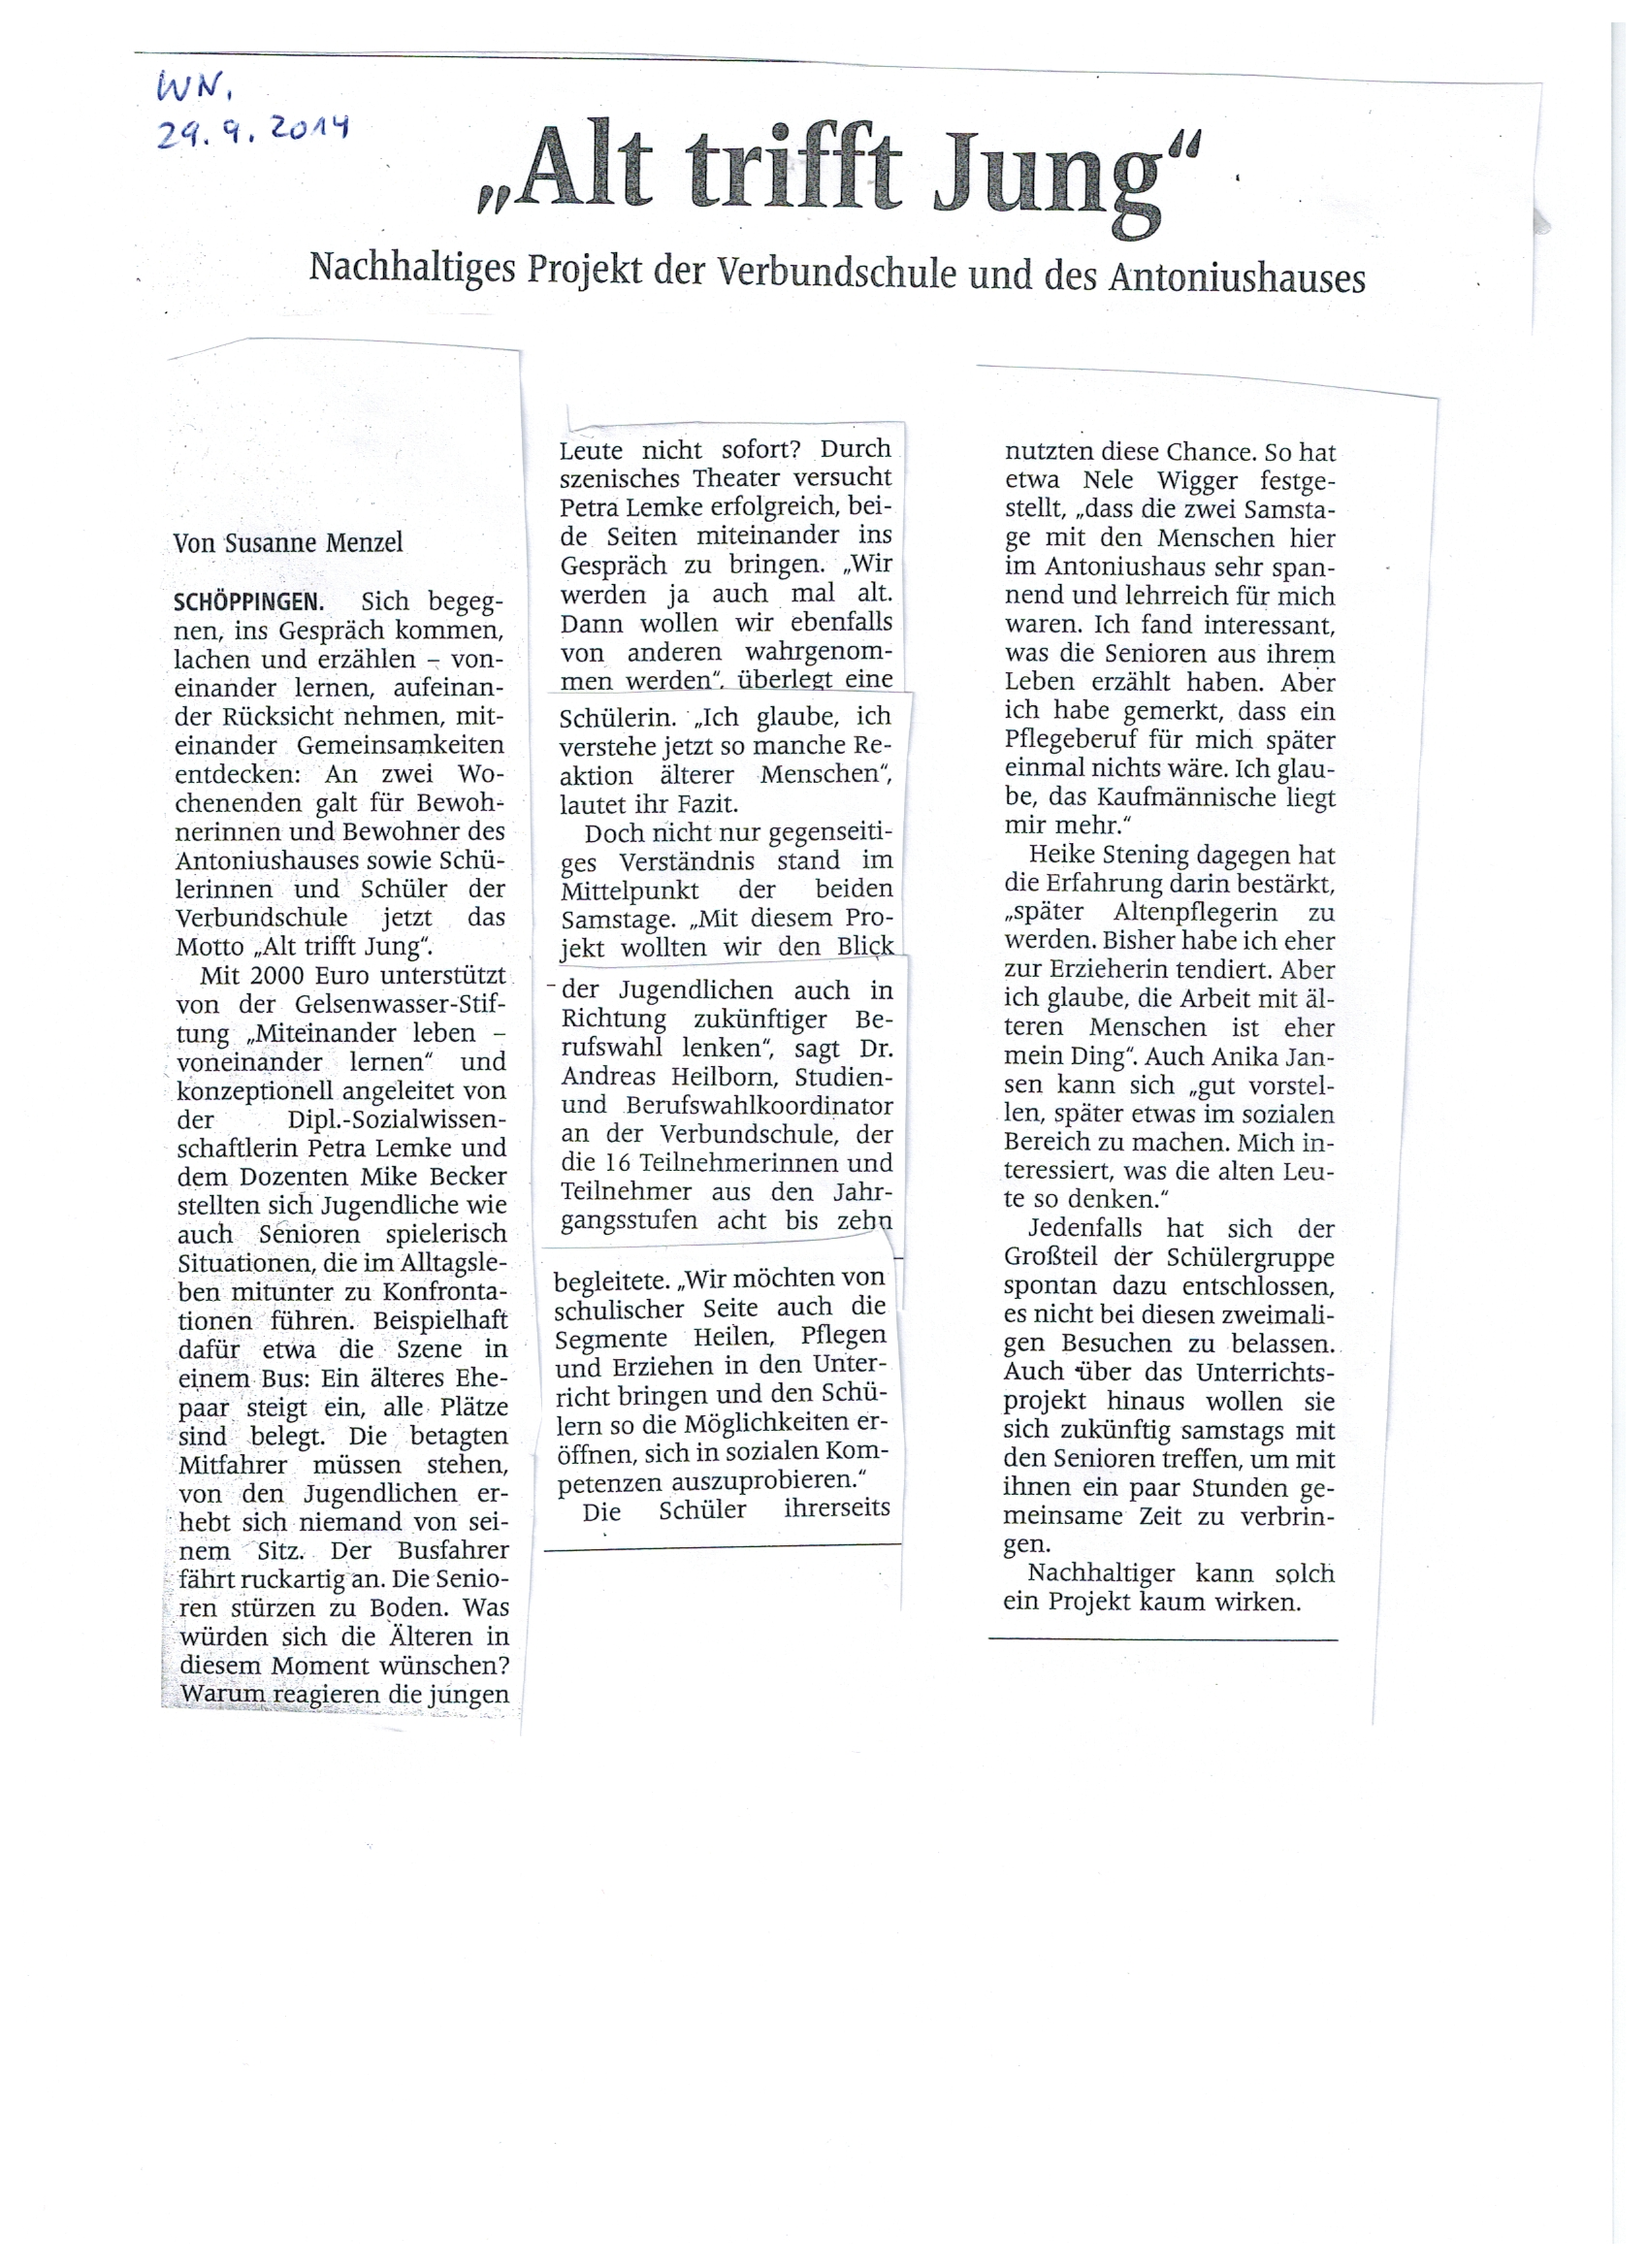 aec_Scan_20141027 (2).png